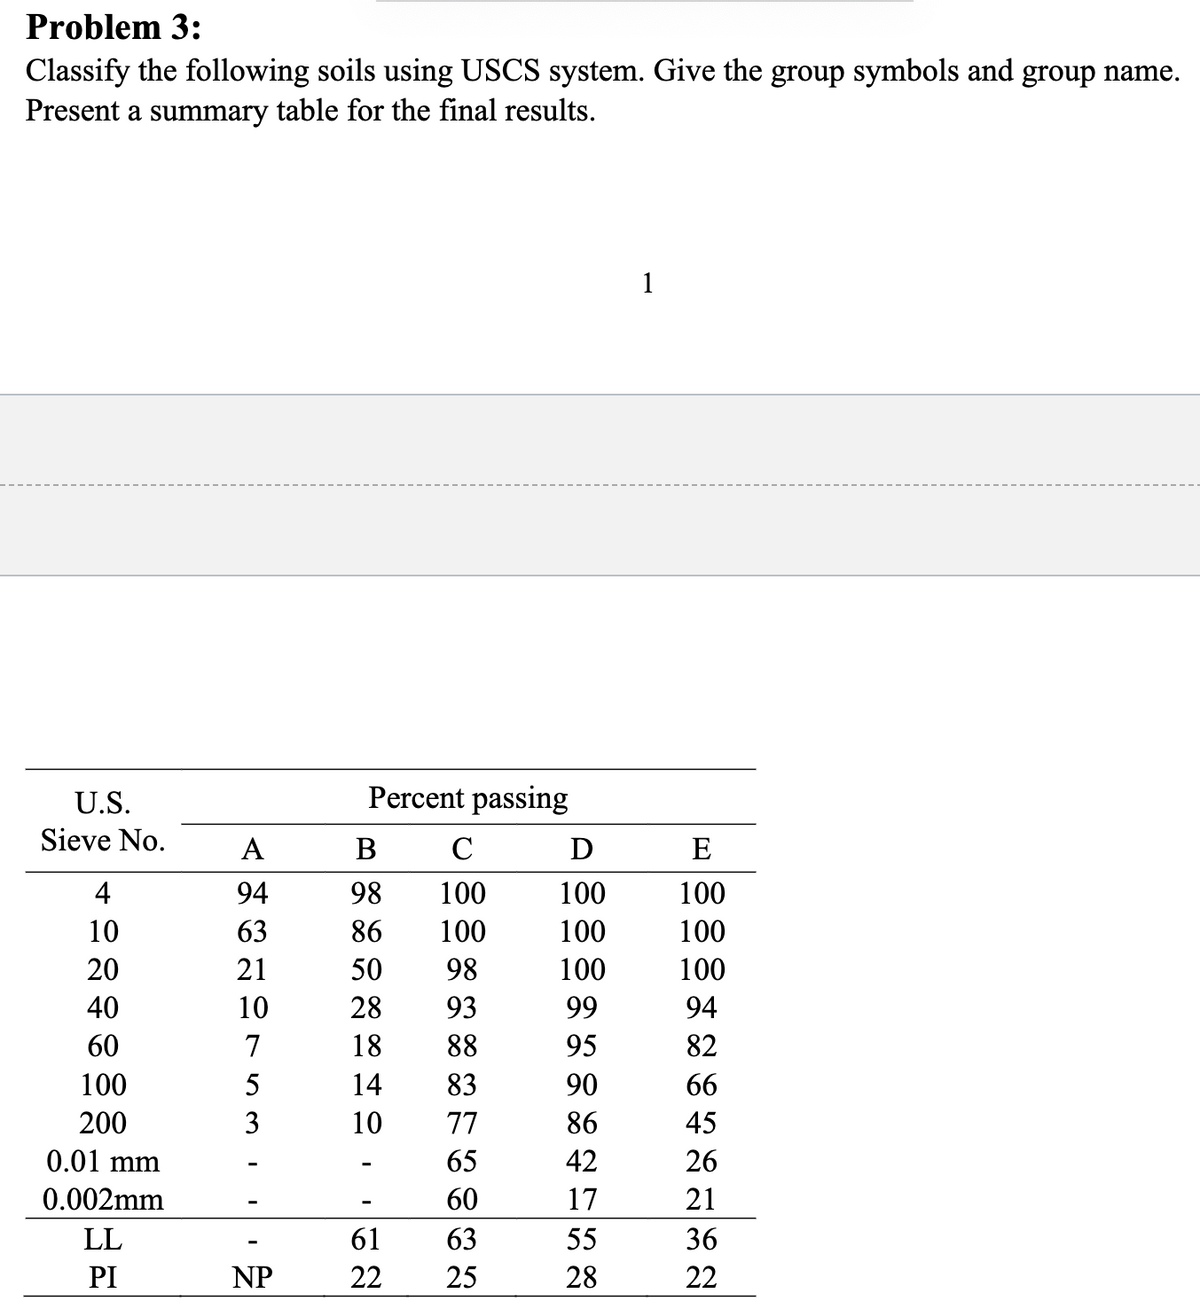 Problem 3:
Classify the following soils using USCS system. Give the group symbols and group name.
Present a summary table for the final results.
1
U.S.
Percent passing
Sieve No.
A
B
C
D
E
4
94
98
100
100
100
10
63
86
100
100
100
20
21
50
98
100
100
40
10
28
93
99
94
60
7
18
88
95
82
100
5
14
83
90
66
200
3
10
77
86
45
0.01 mm
65
42
26
0.002mm
-
LL
PI
NP
12
61
22
5885
60
17
21
63
55
36
25
28
22